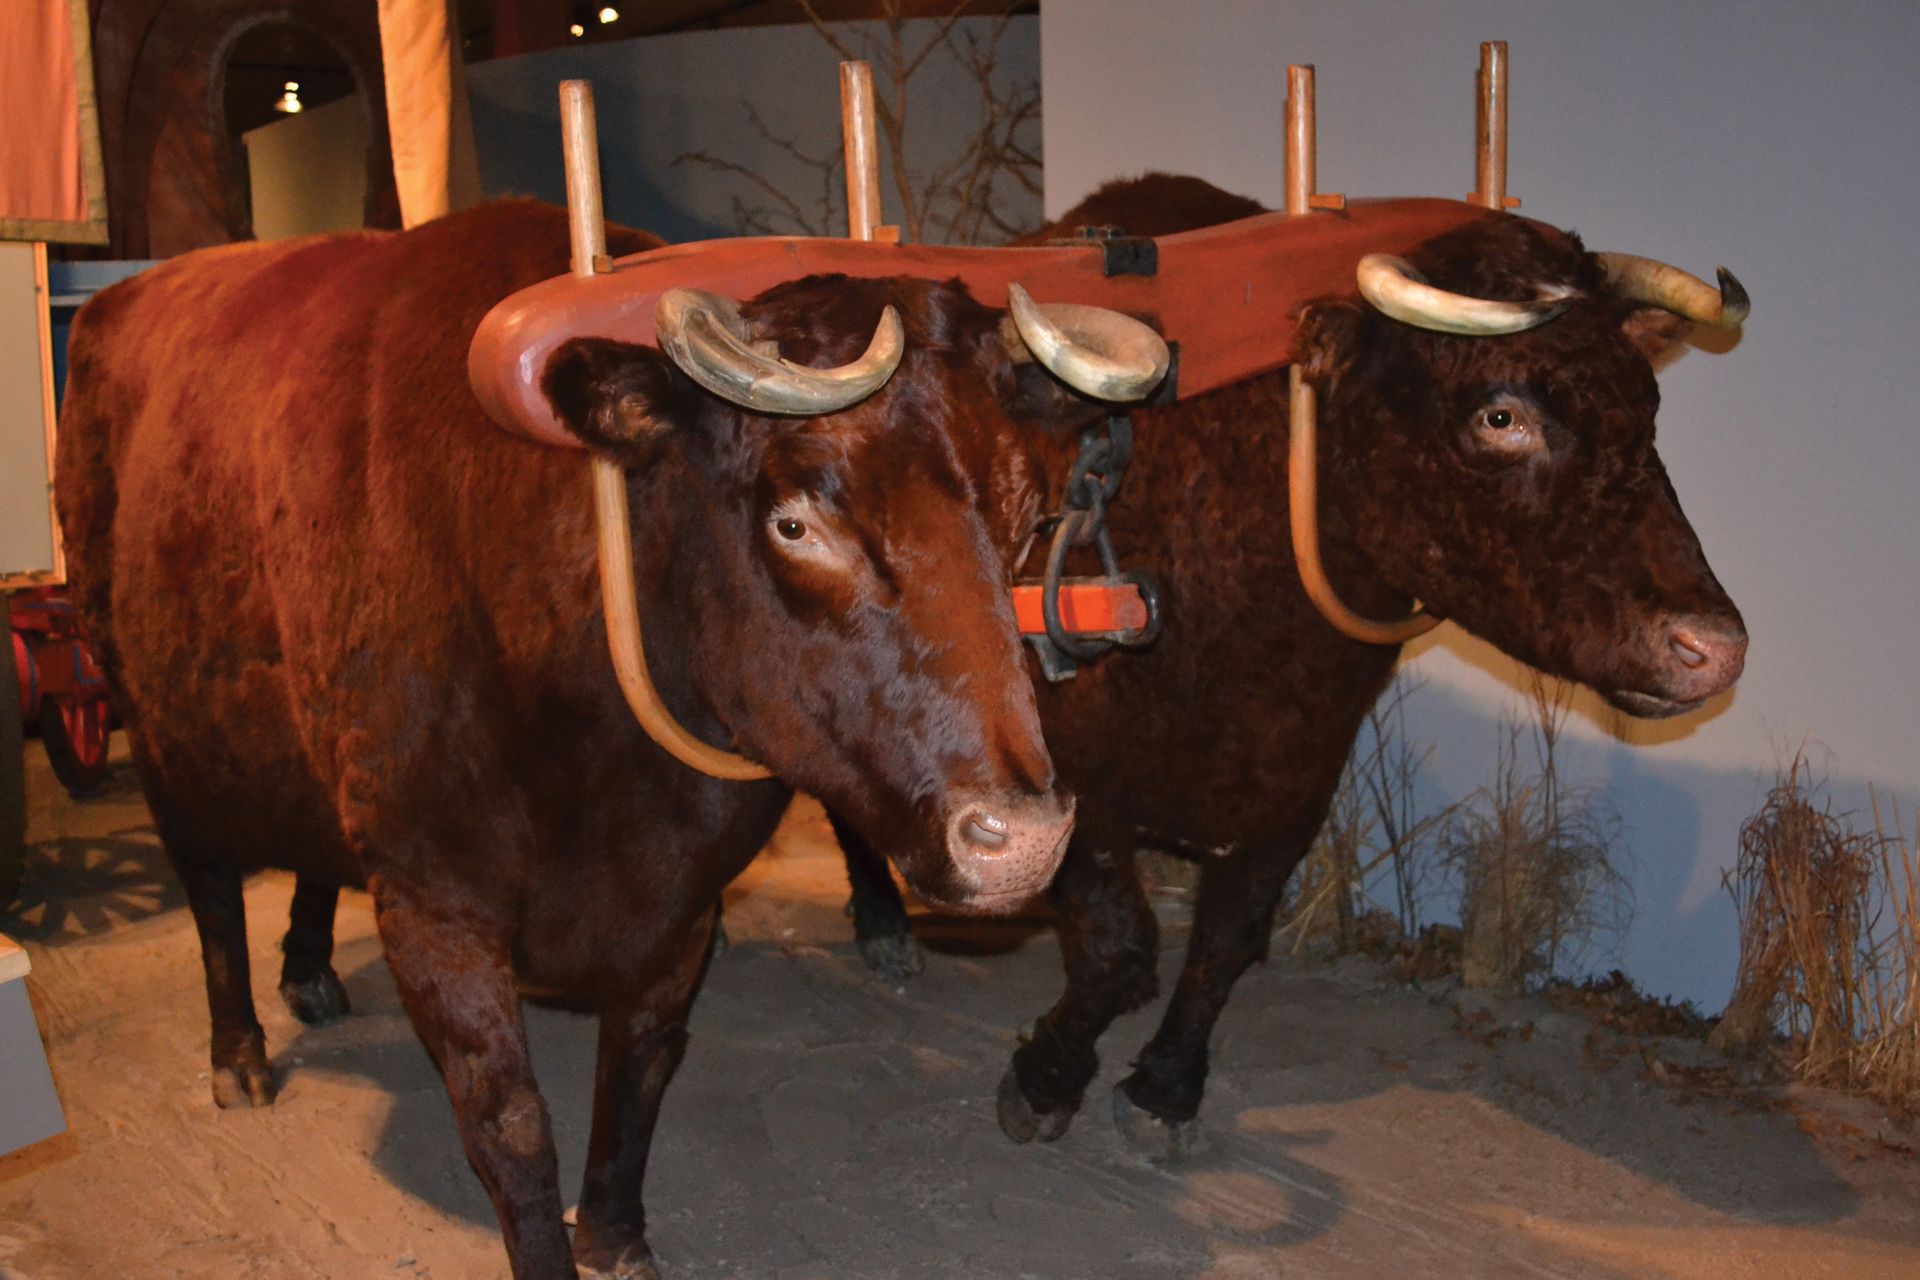 A model of two oxen yoked together.